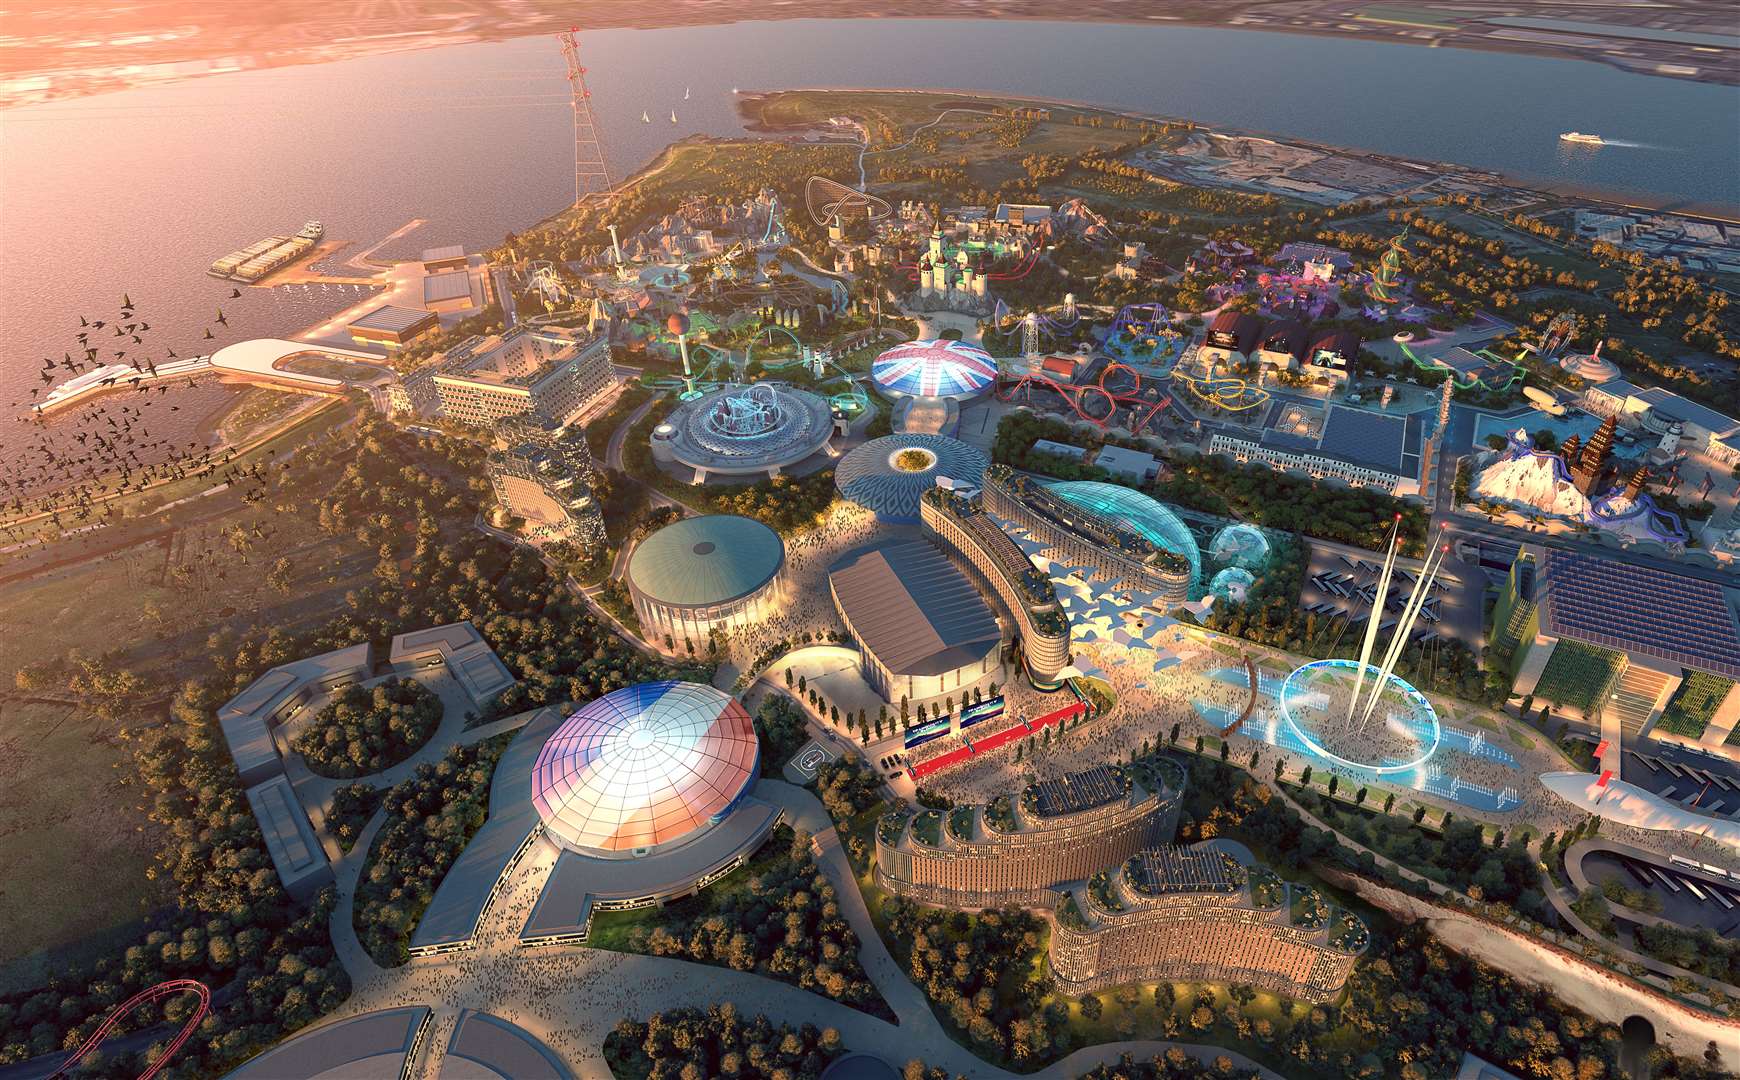 A detailed impression of what the London Resort theme park could look like